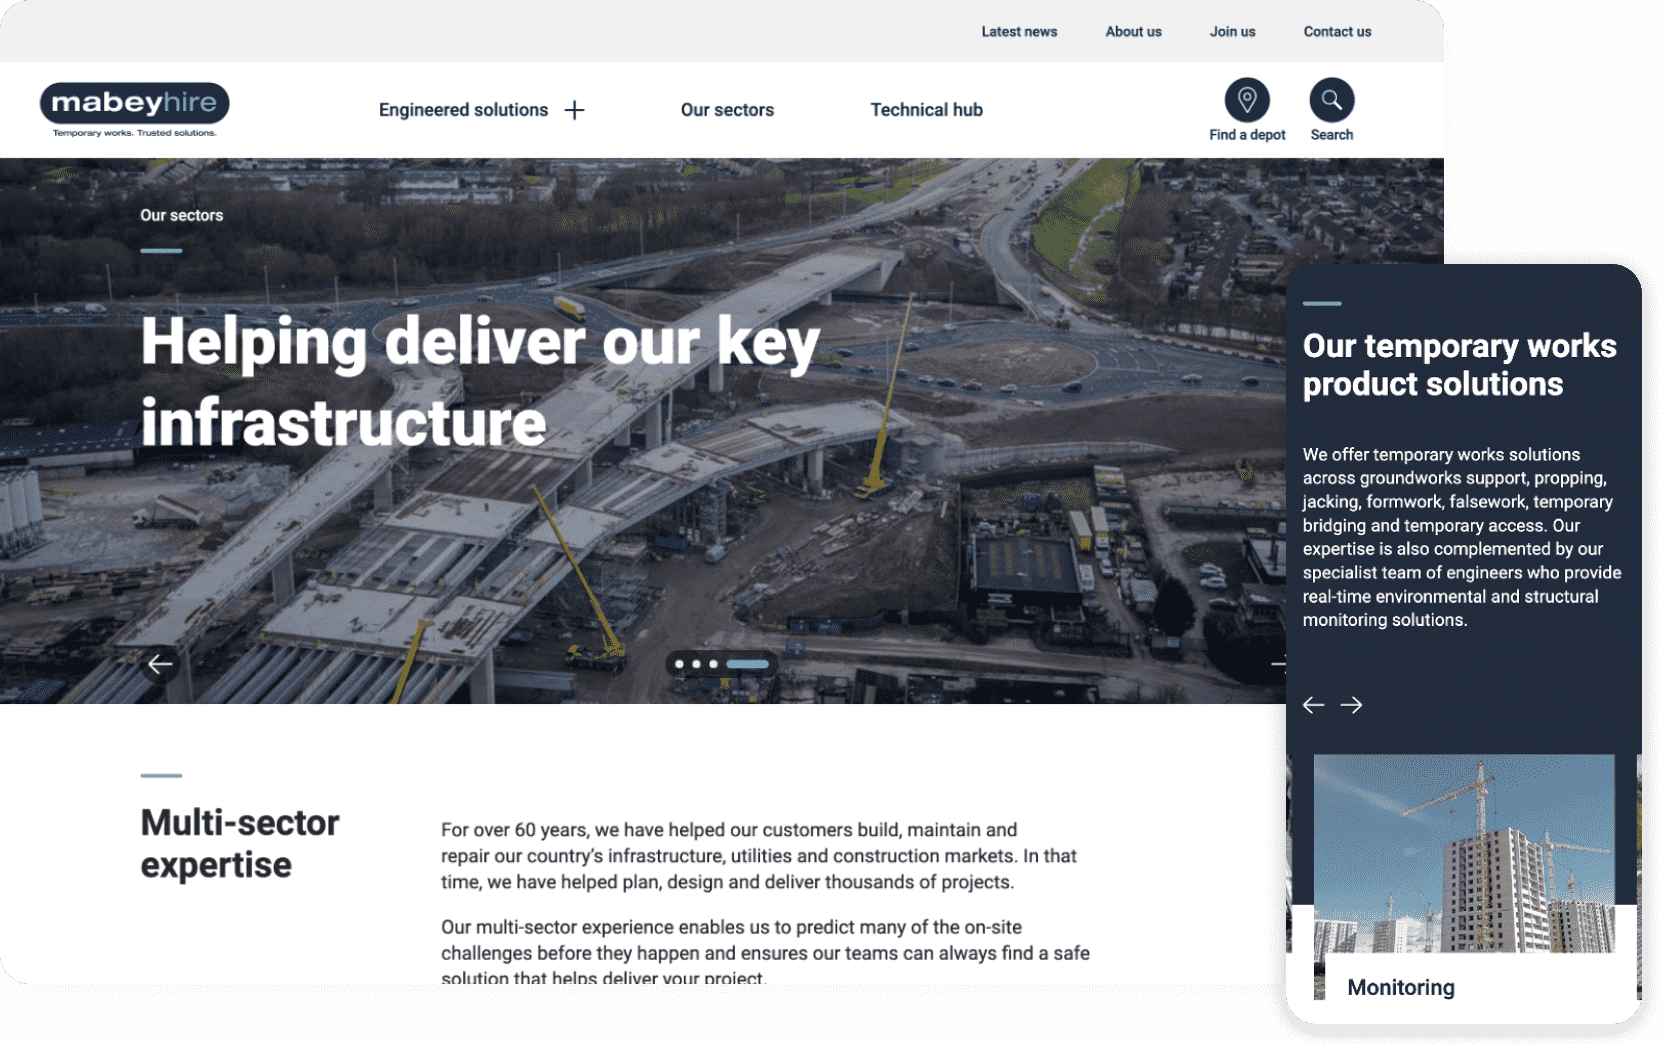 Supporting image with mock up of the Mabey Hire website